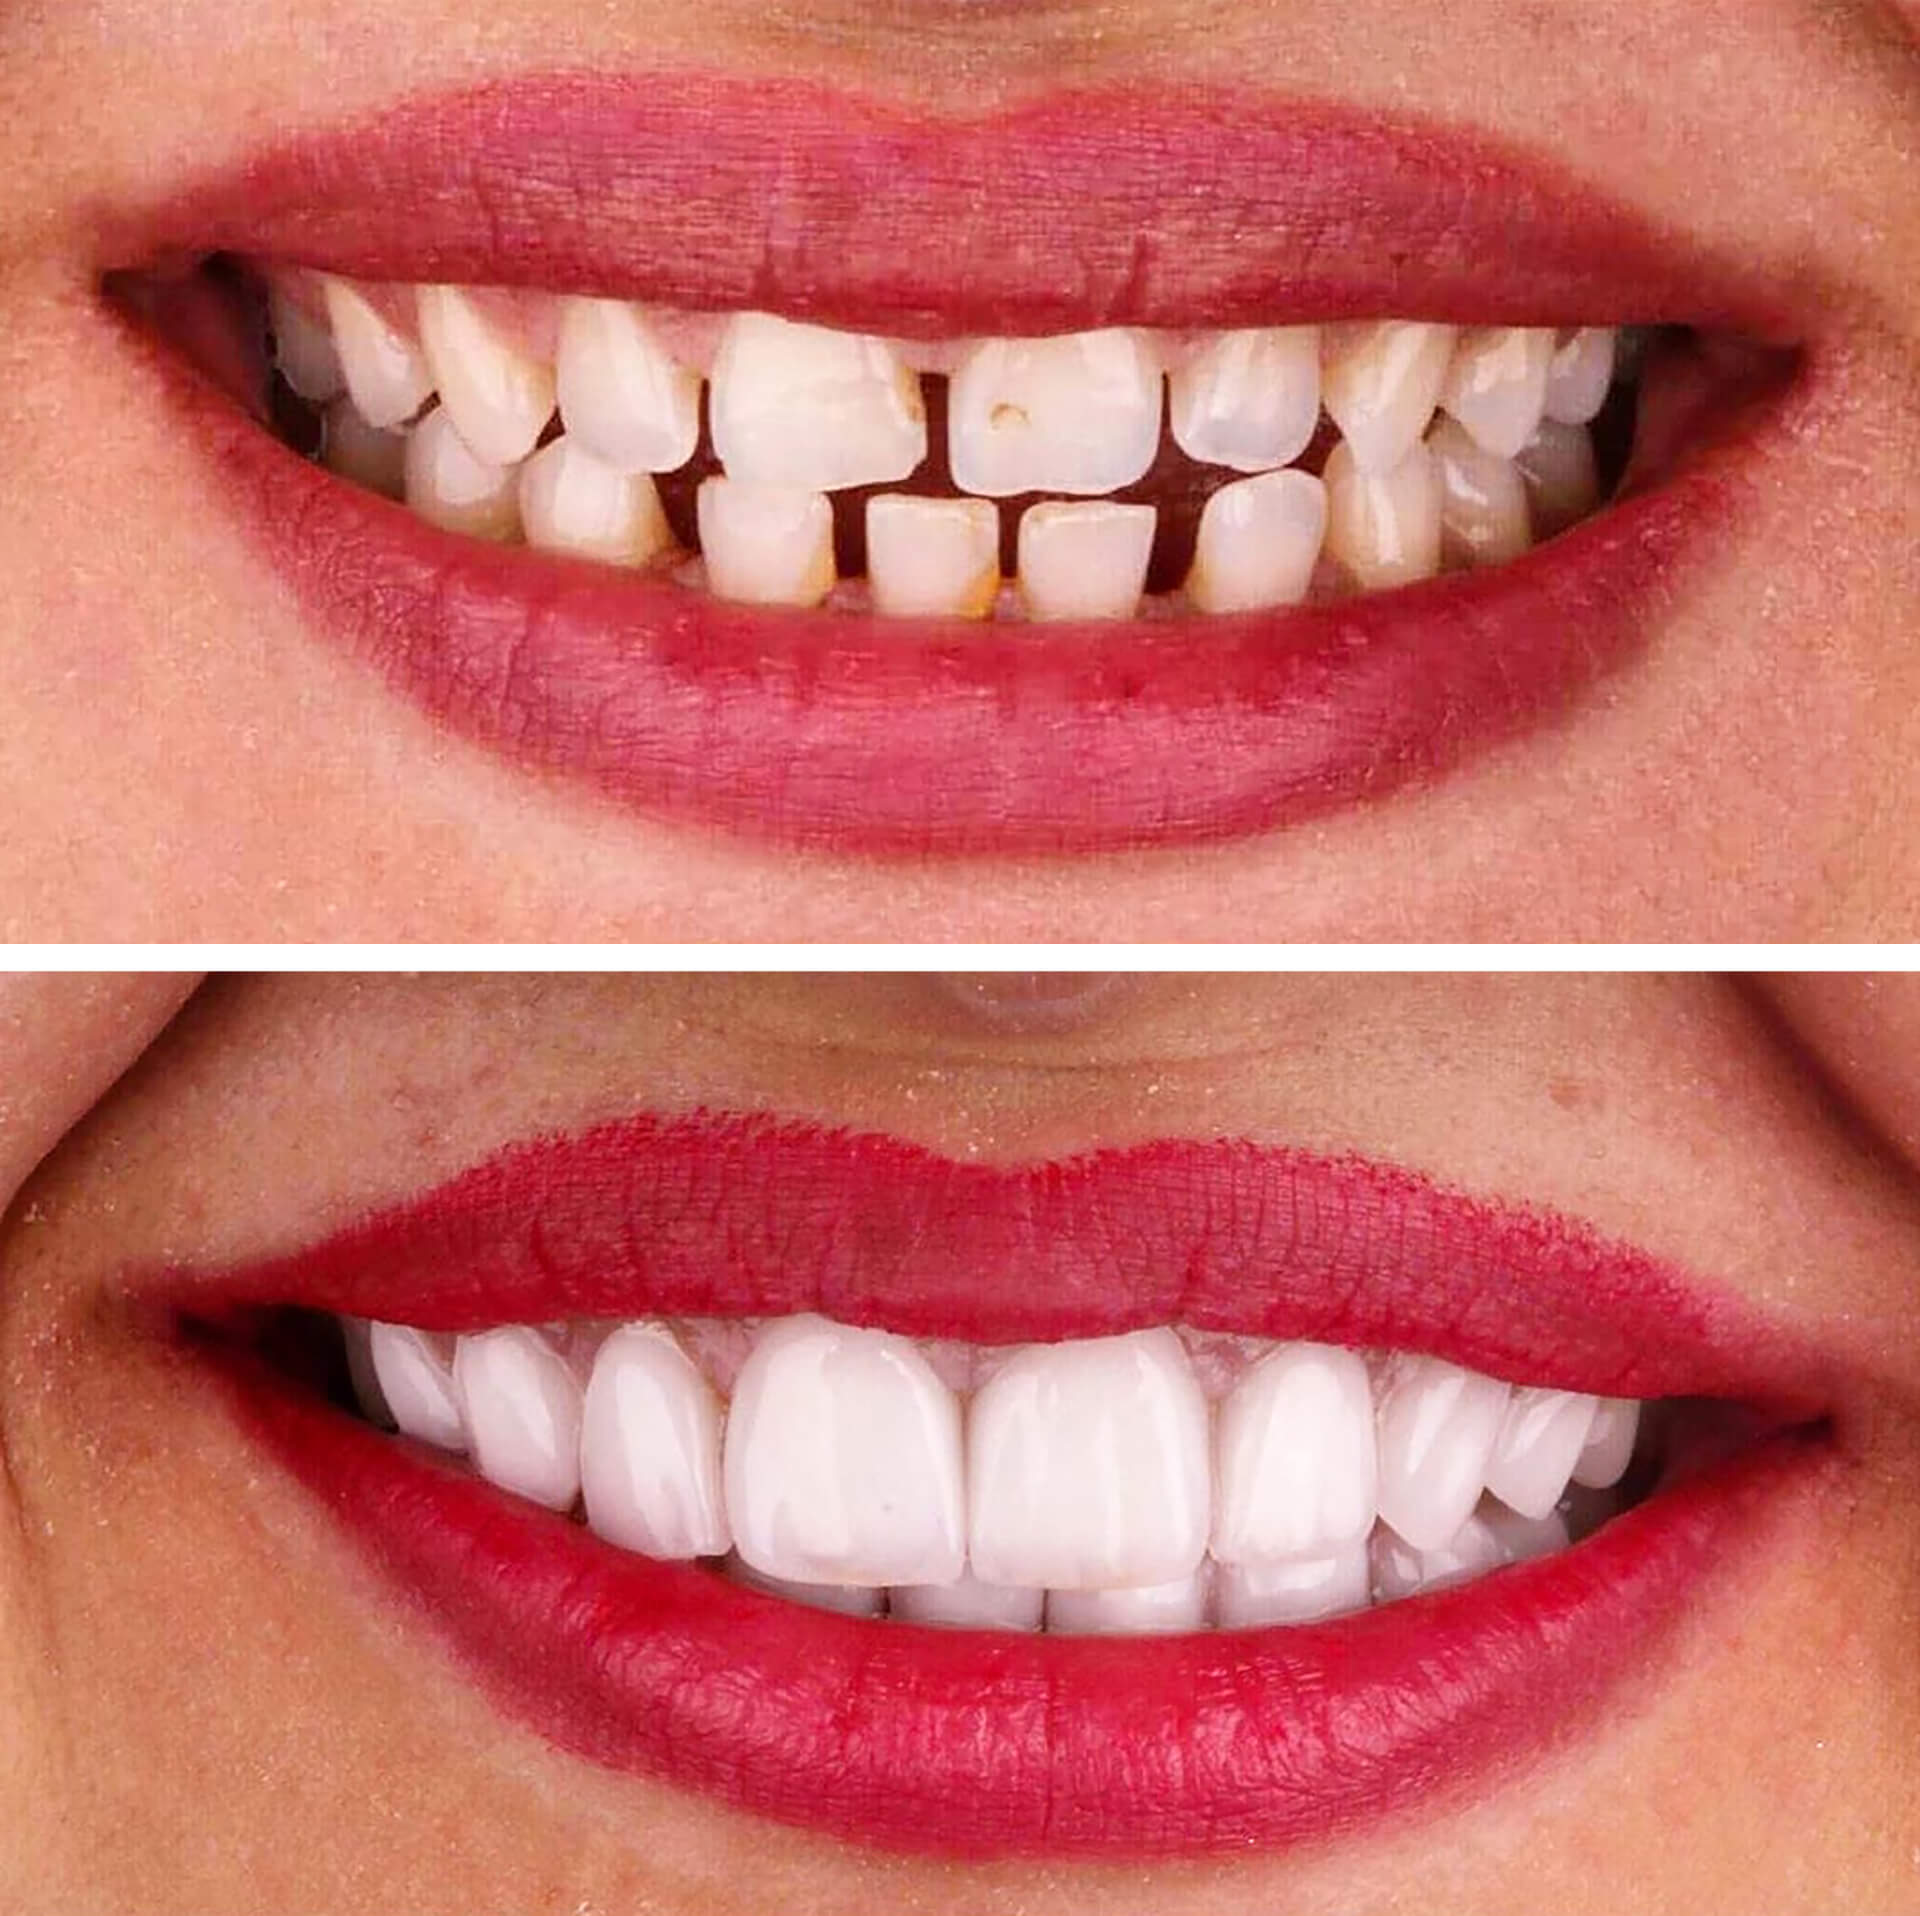 Before and after results of veneers